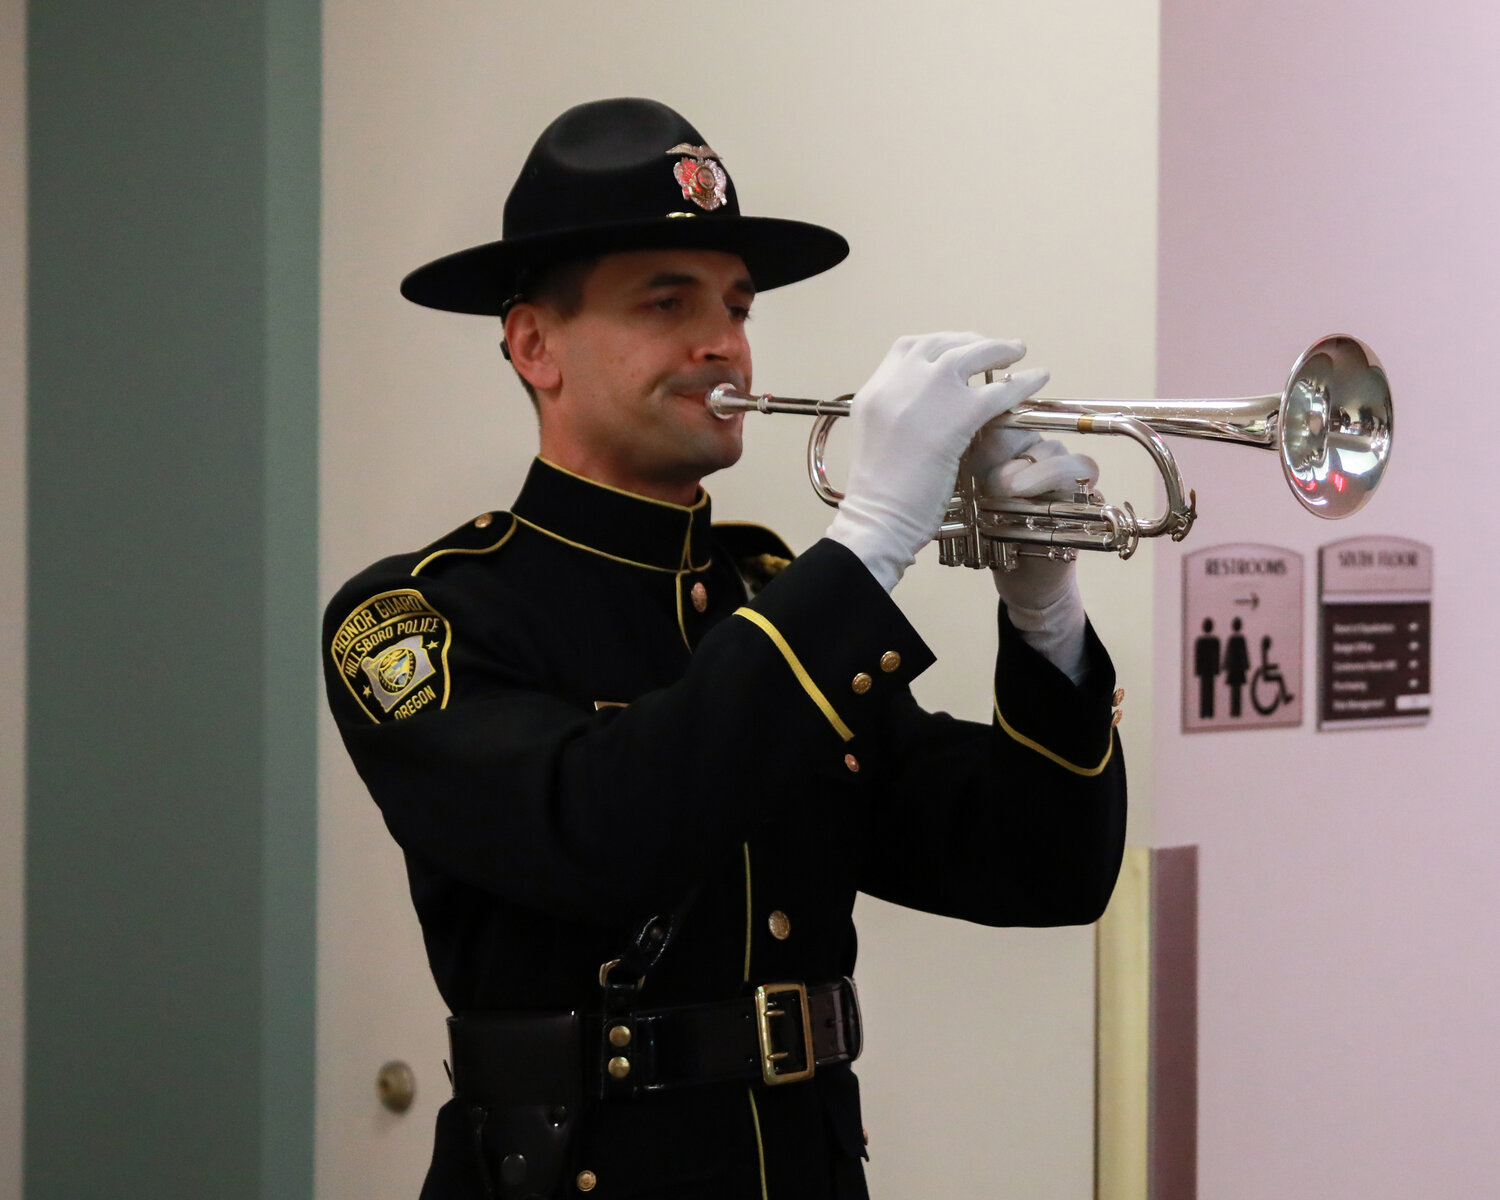 Sergeant Leland Gilbert, of the Hillsboro Police Department, plays taps during the Clark County Law Enforcement Memorial Ceremony on Thursday, May 18.